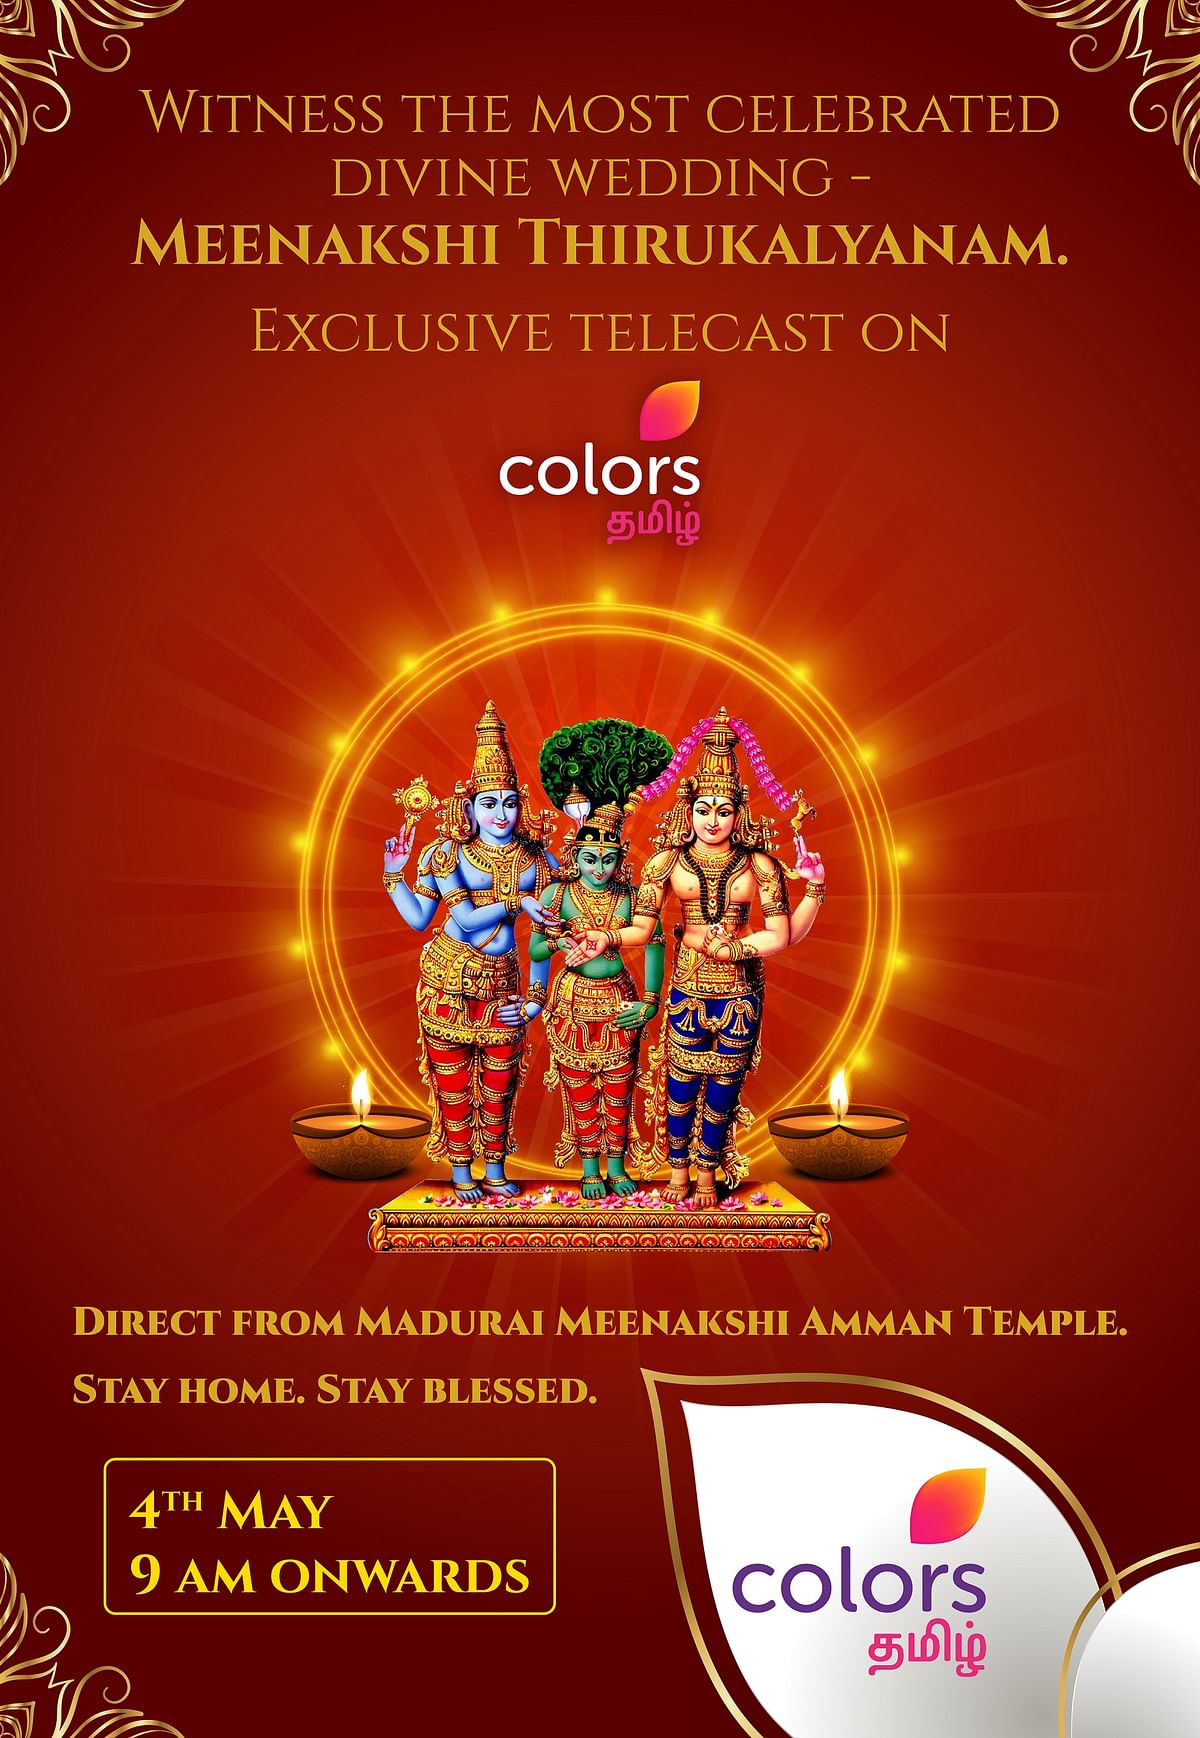 COLORS Tamil brings the celestial wedding of Madurai Meenakshi to your homes